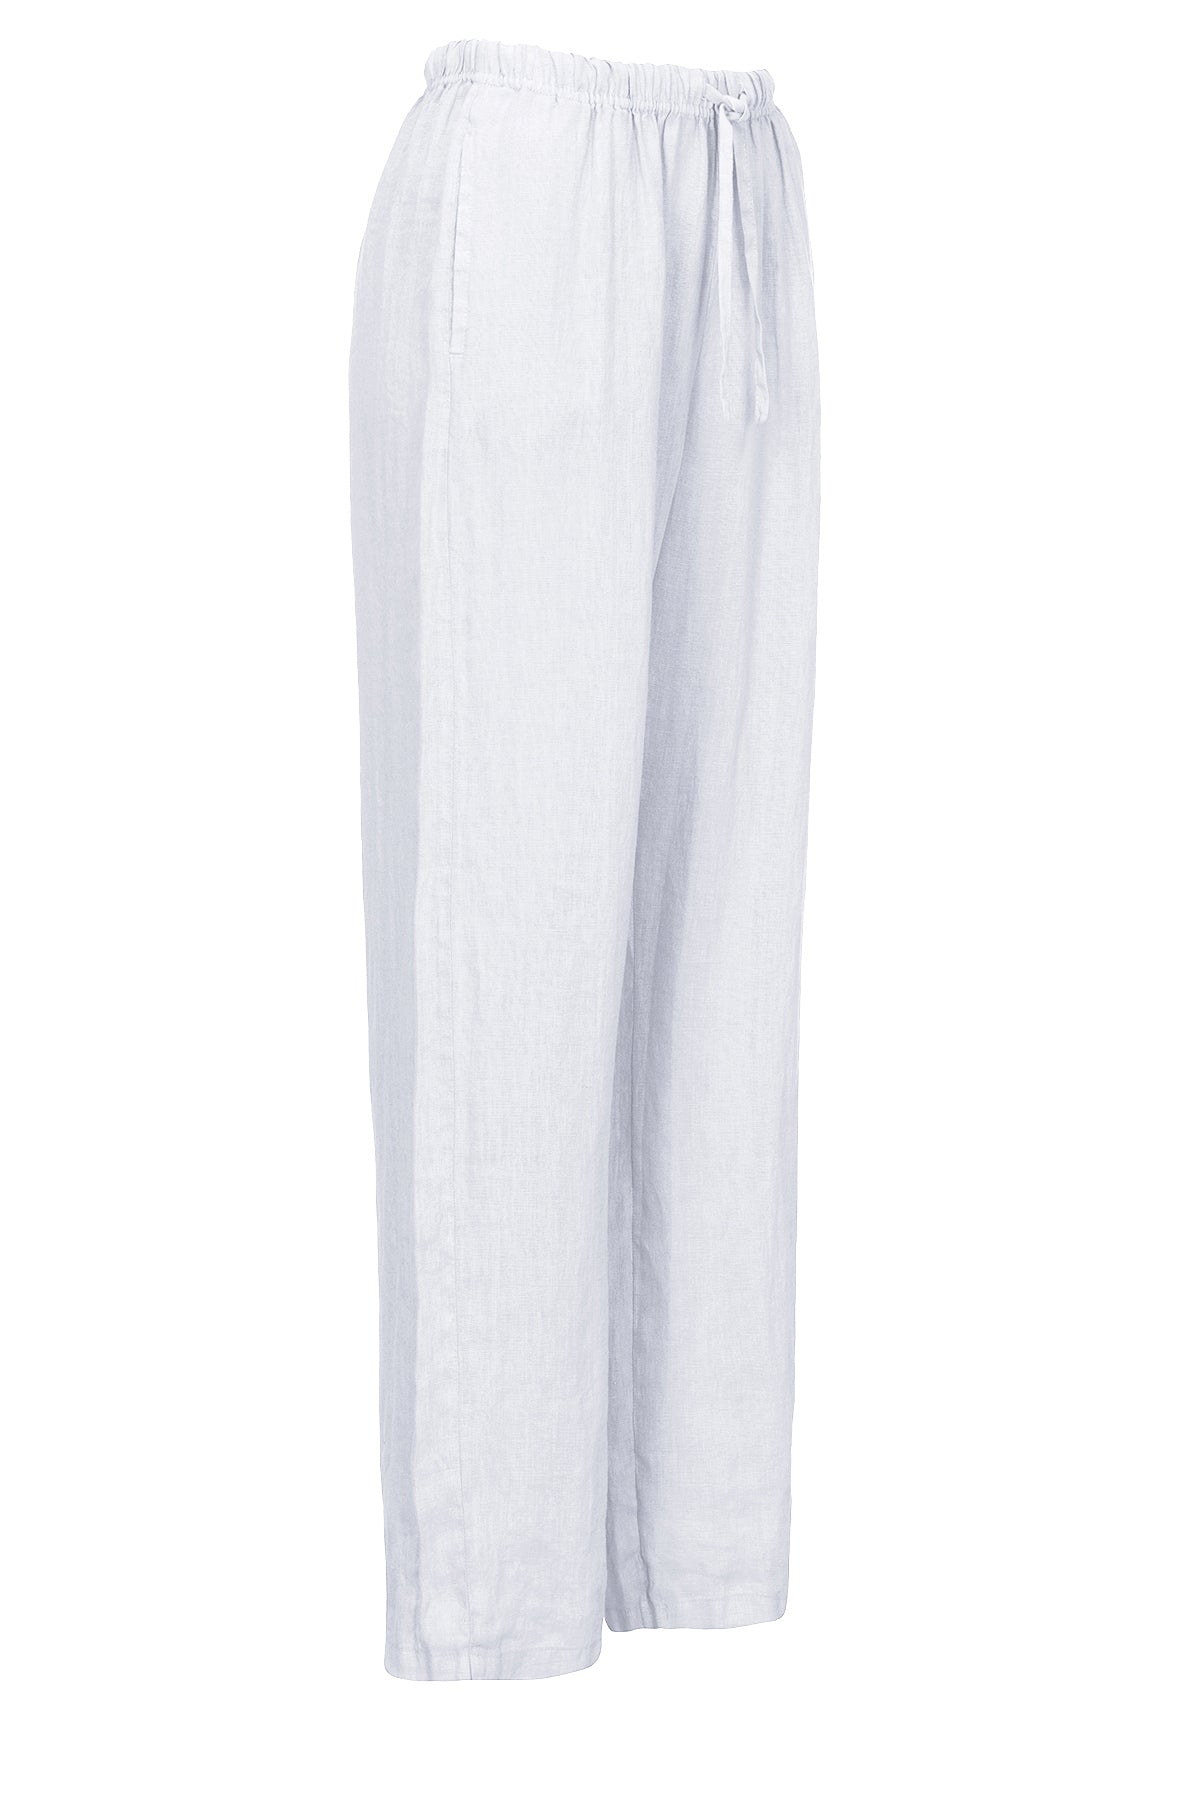 LUXZUZ // ONE TWO Elilin Pant Pant 902 Natural White